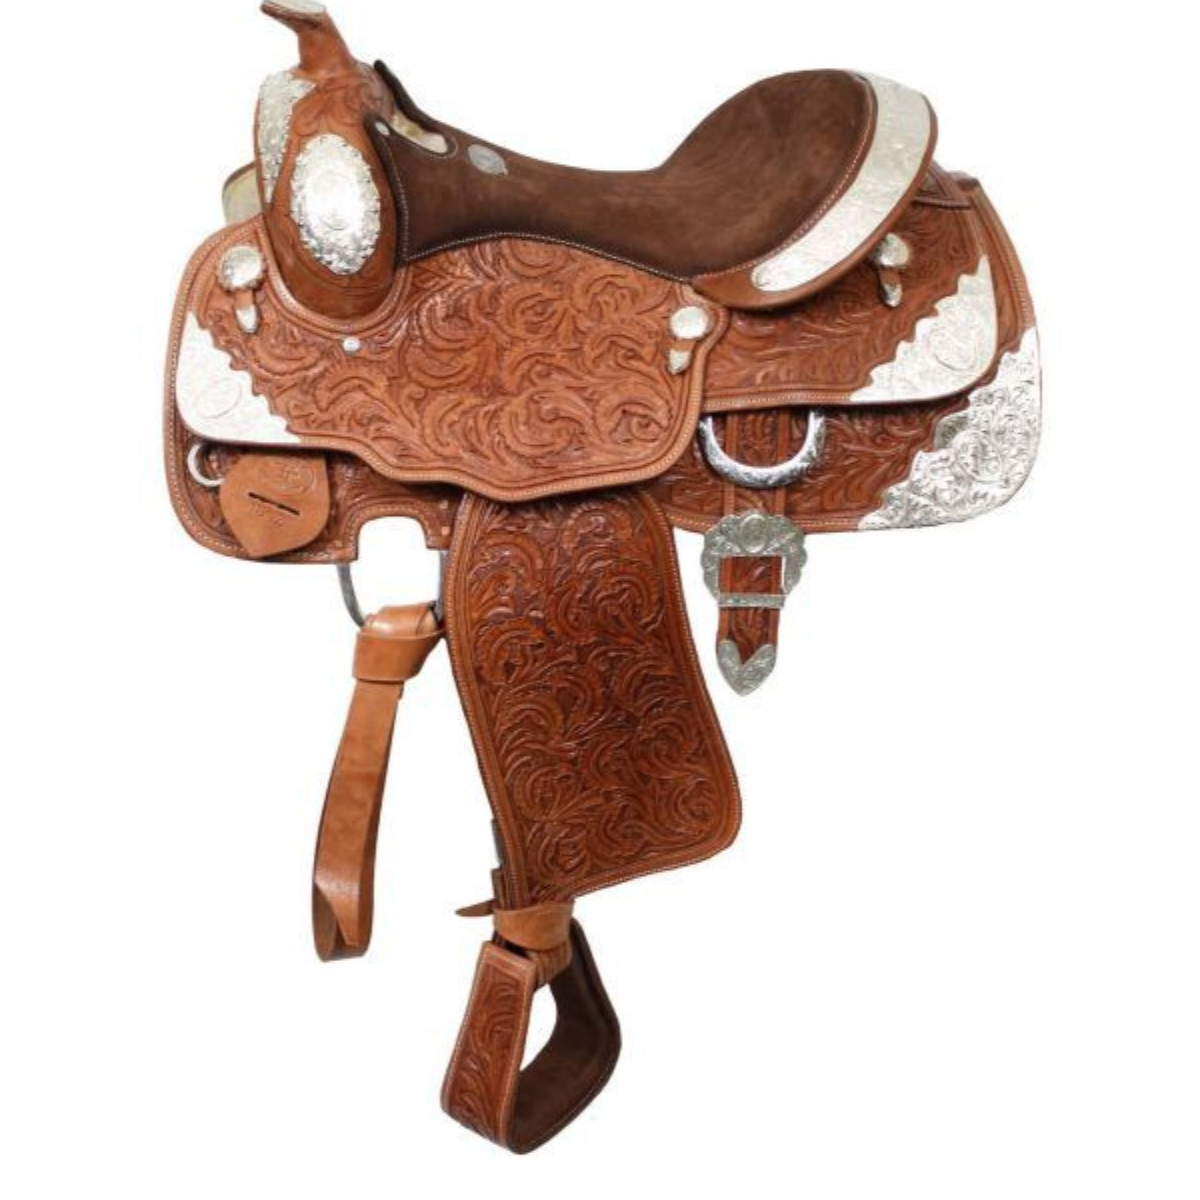 16" DOUBLE T SHOW SADDLE FULLY TOOLED, SUEDE LEATHER SEAT - Double T Saddles